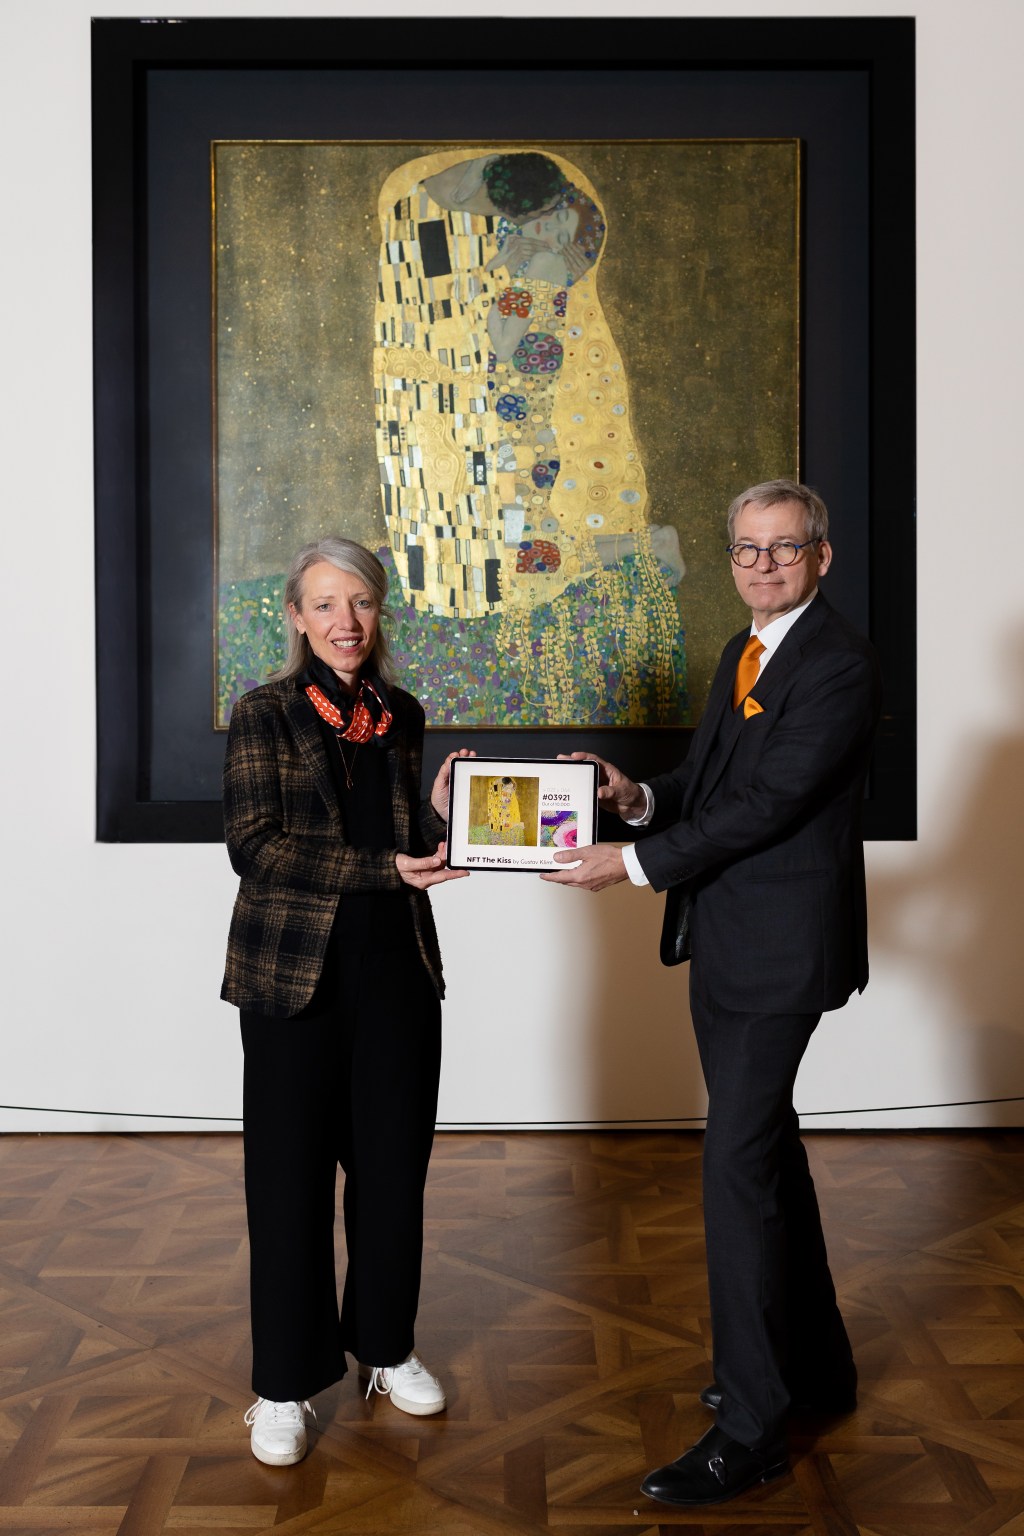 Two people posing in front of the physical "The Kiss" painting holding up a tablet showing the NFT